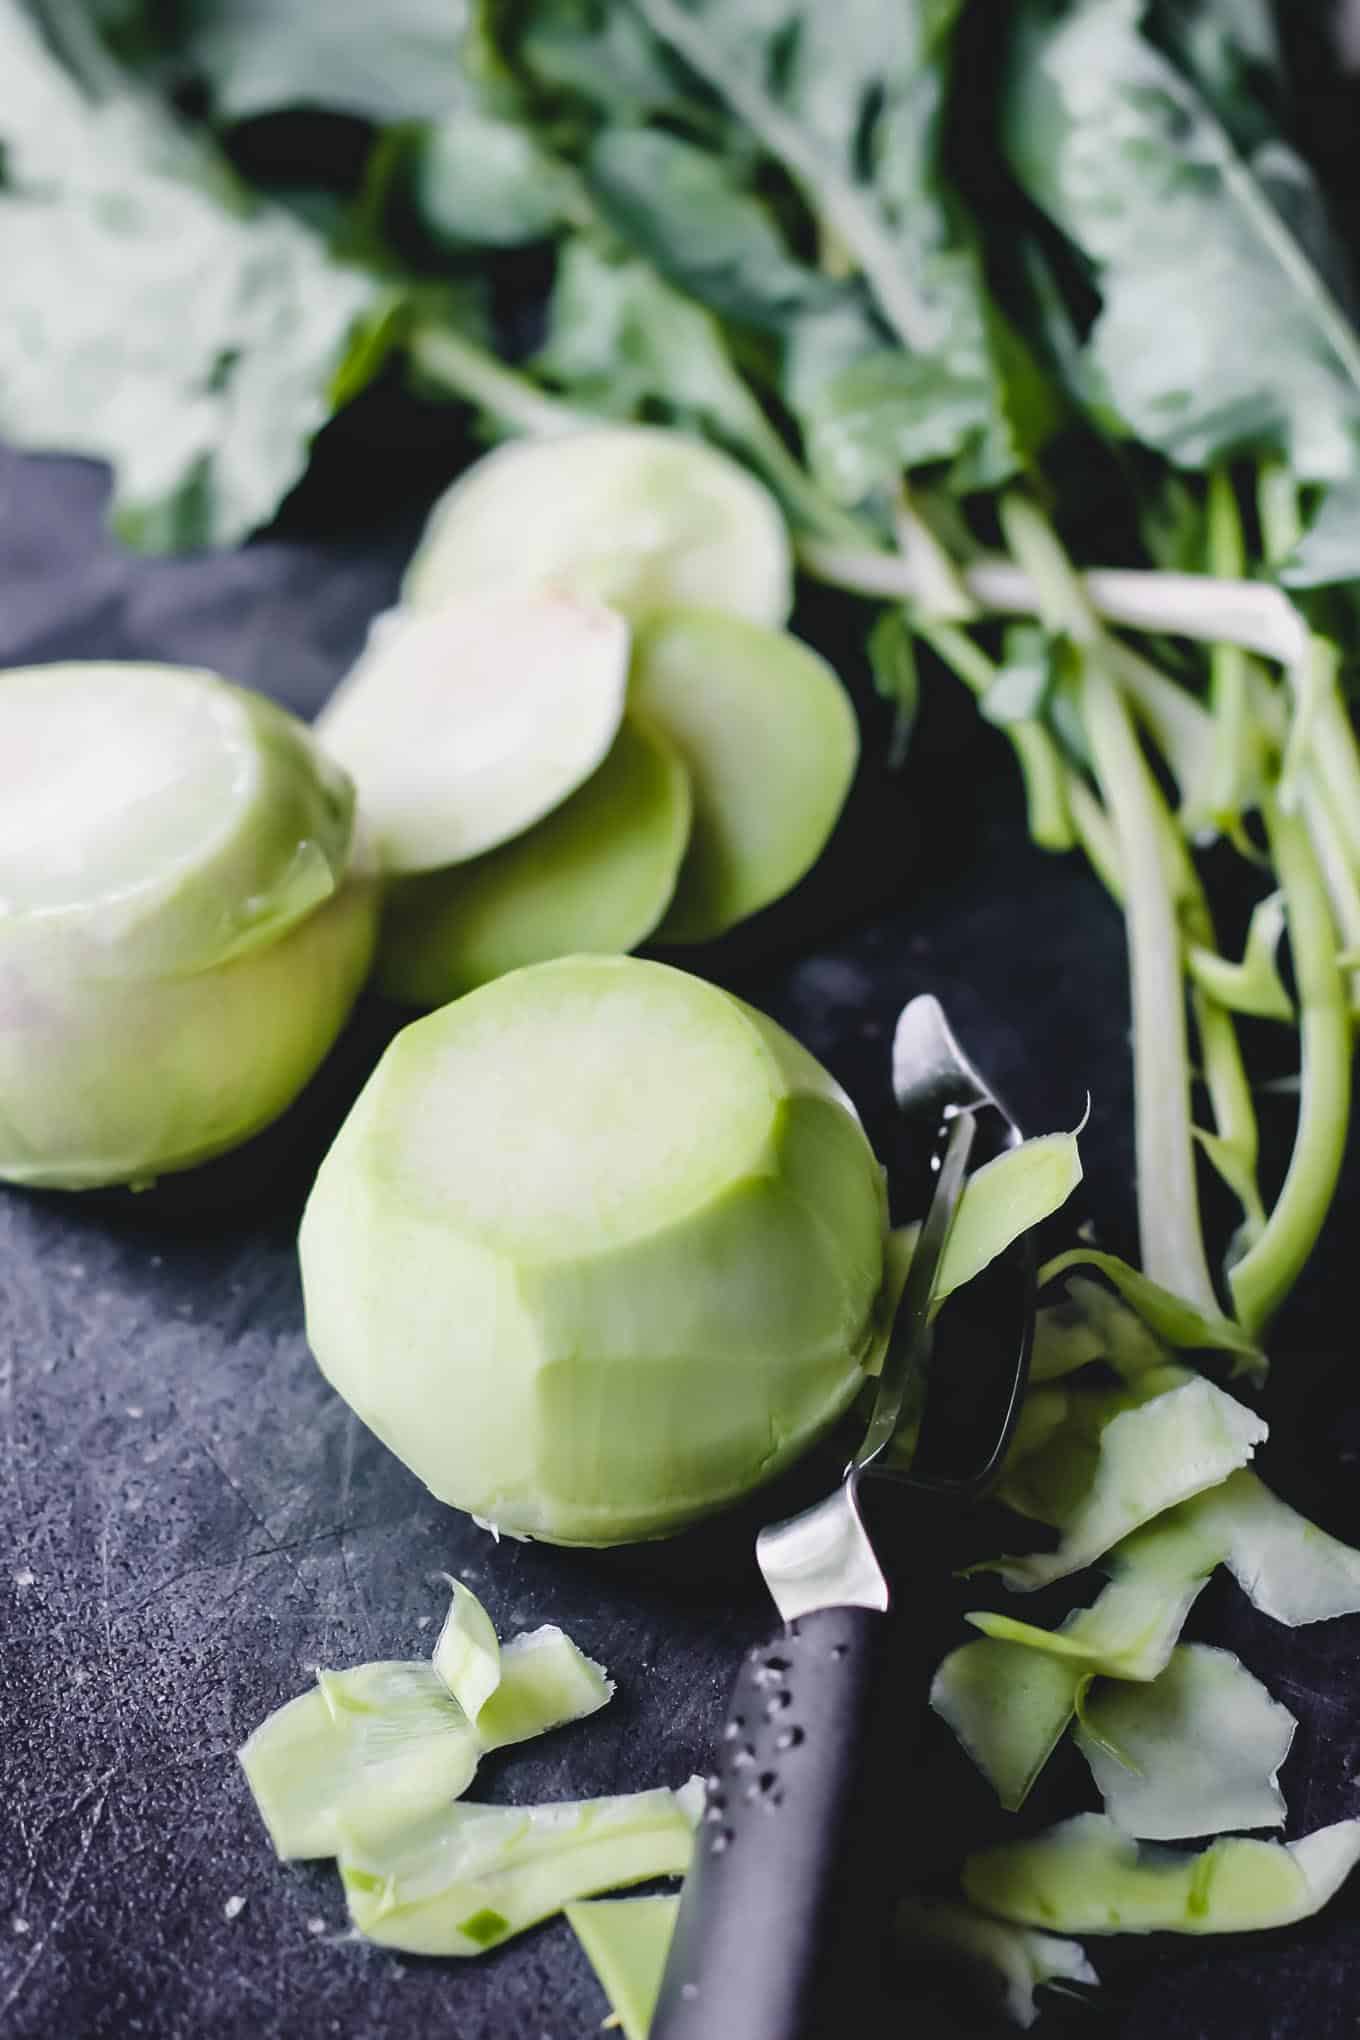 Using a vegetable peeler to remove outer layers of kohlrabi